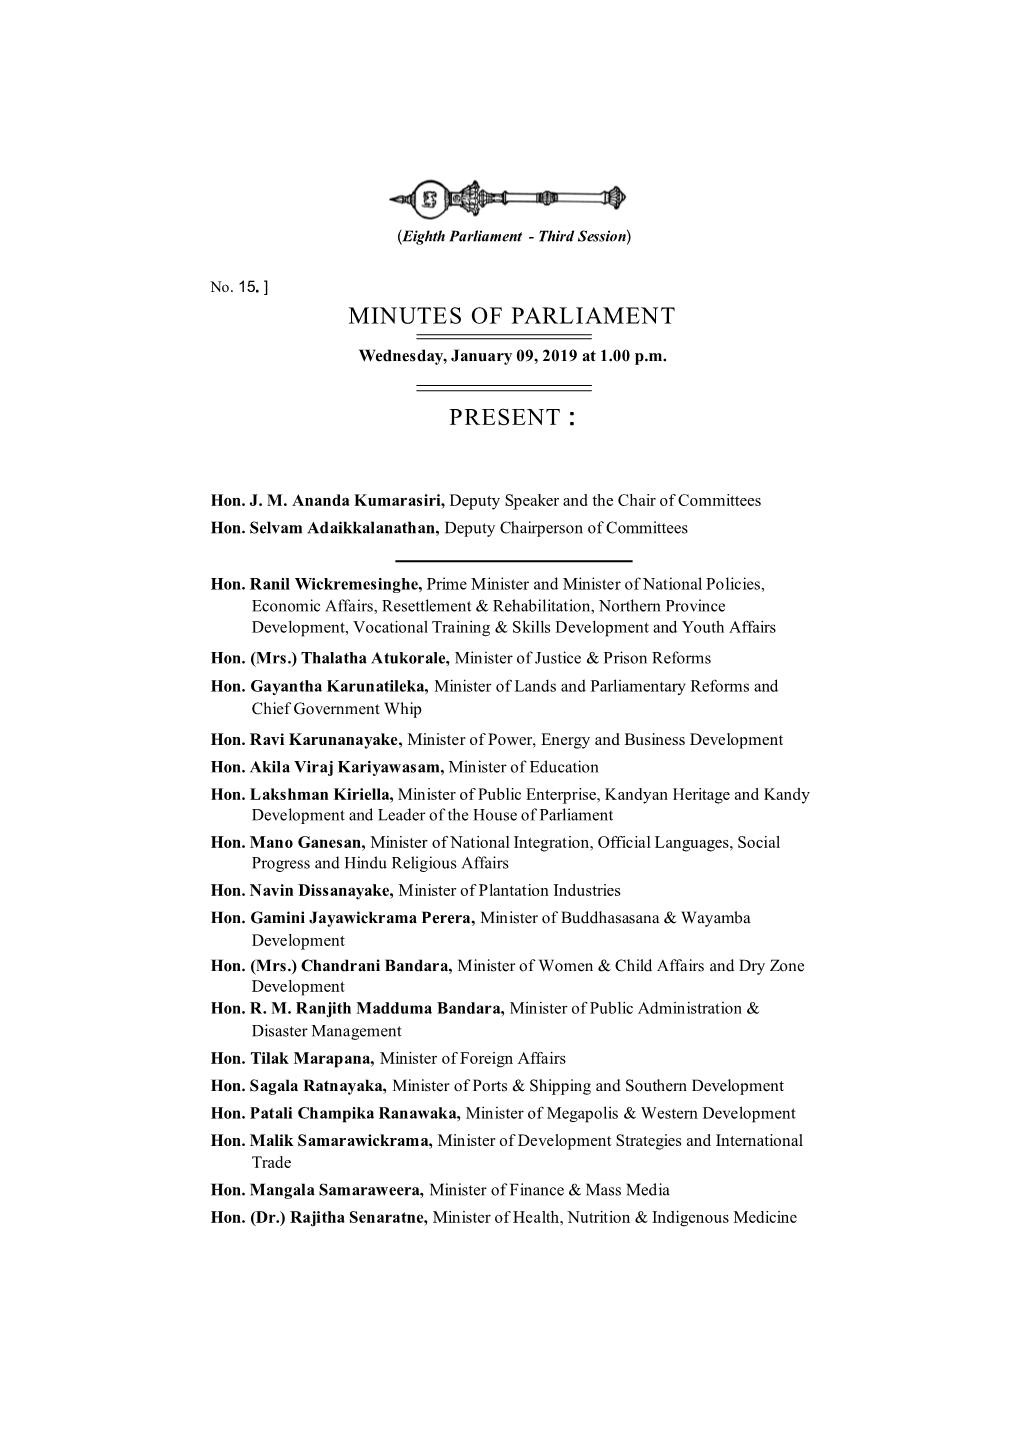 Minutes of Parliament for 09.01.2019